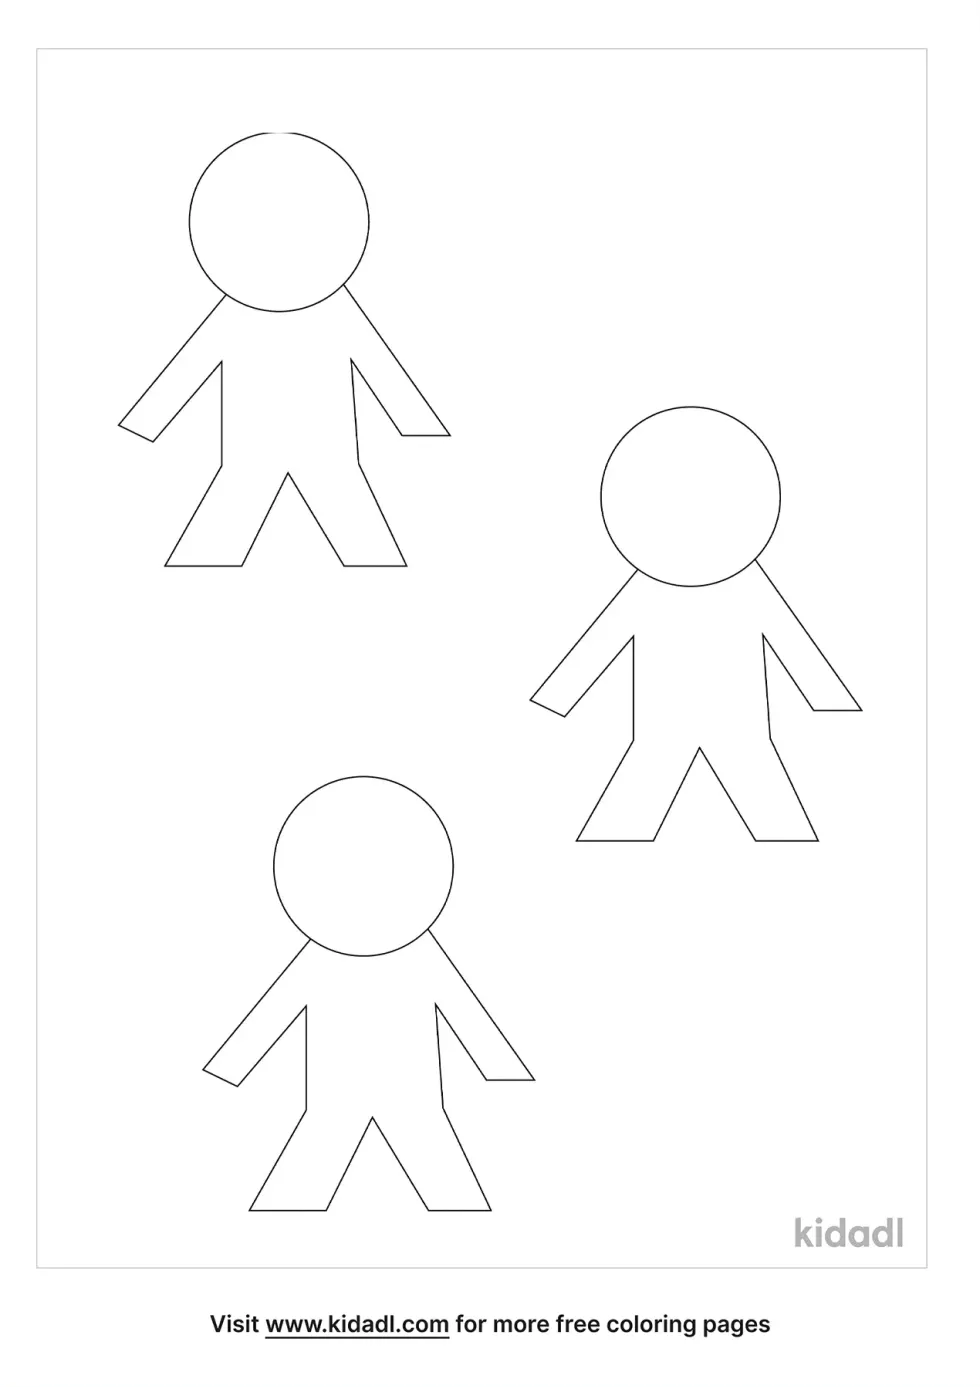 Blank Paper Dolls Coloring Page